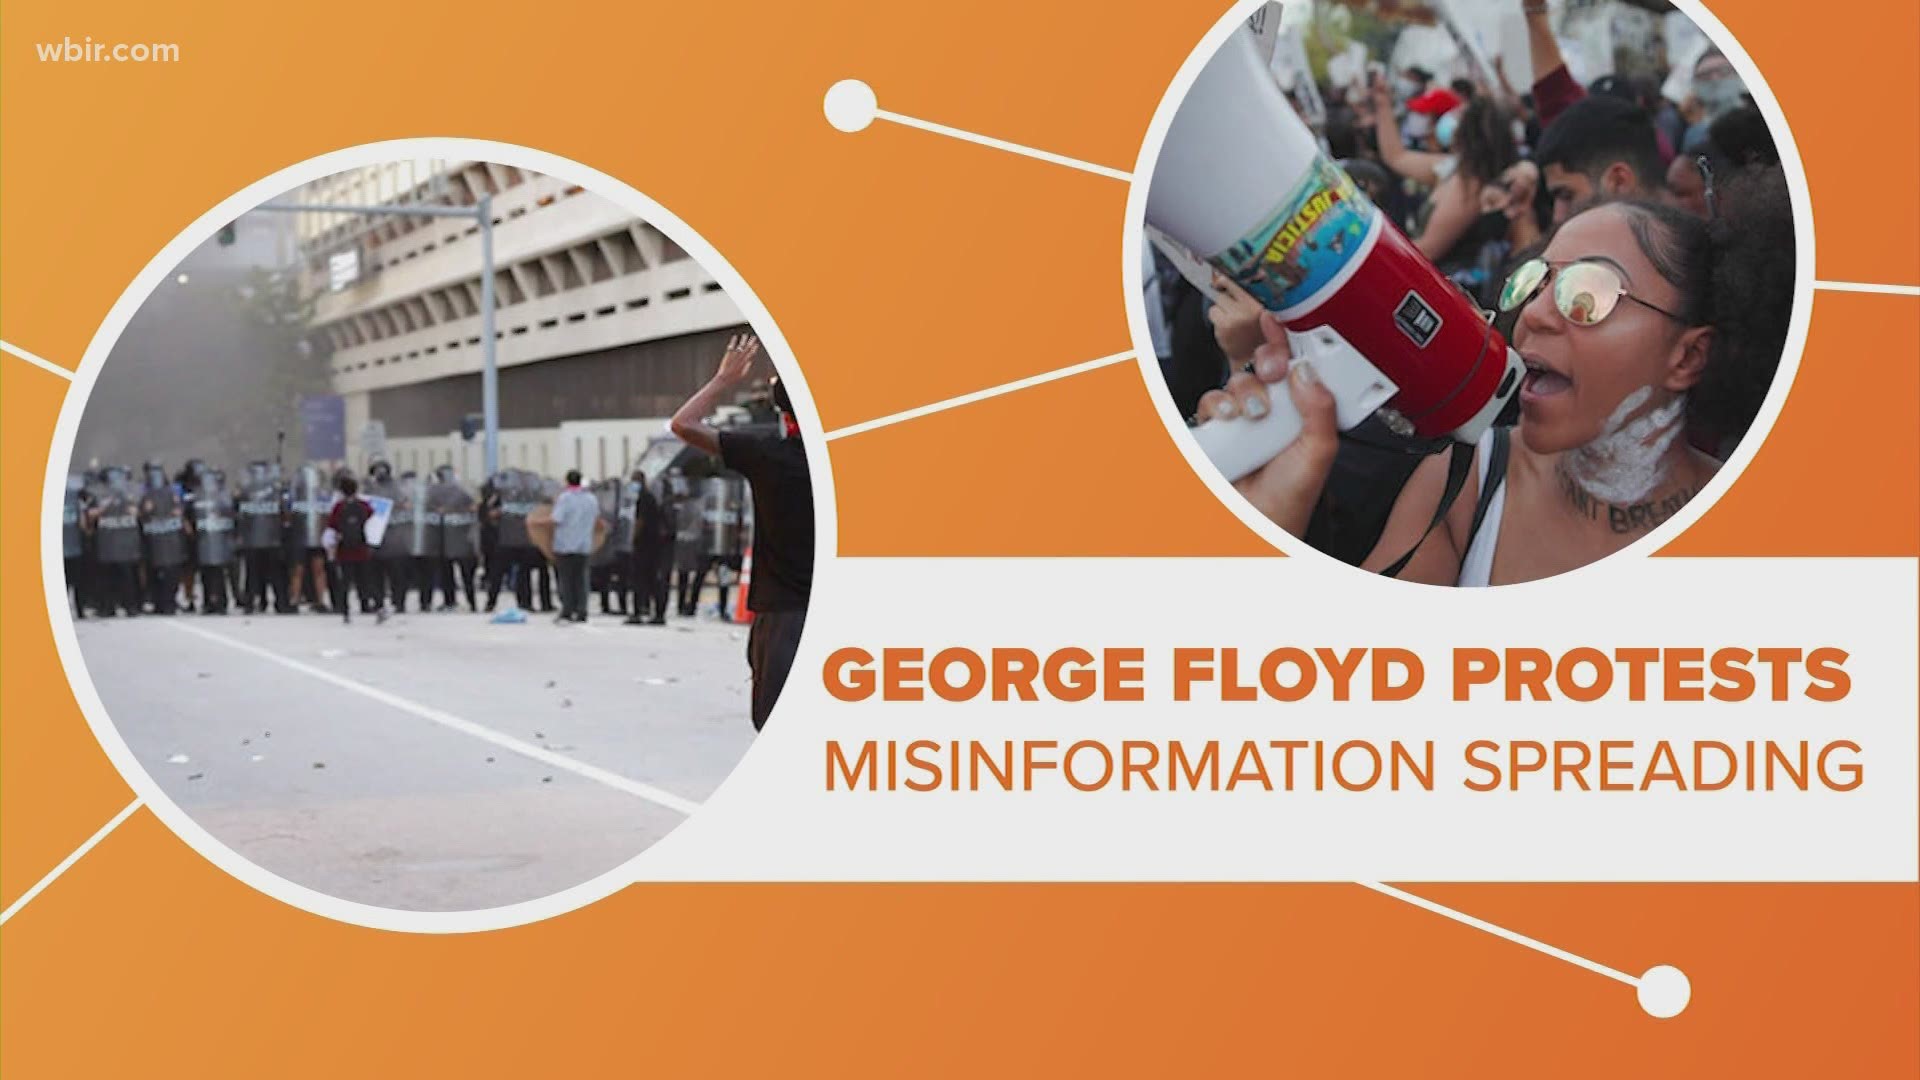 There are lots of developing information about George Floyd protests around the world, but not all of it is true.